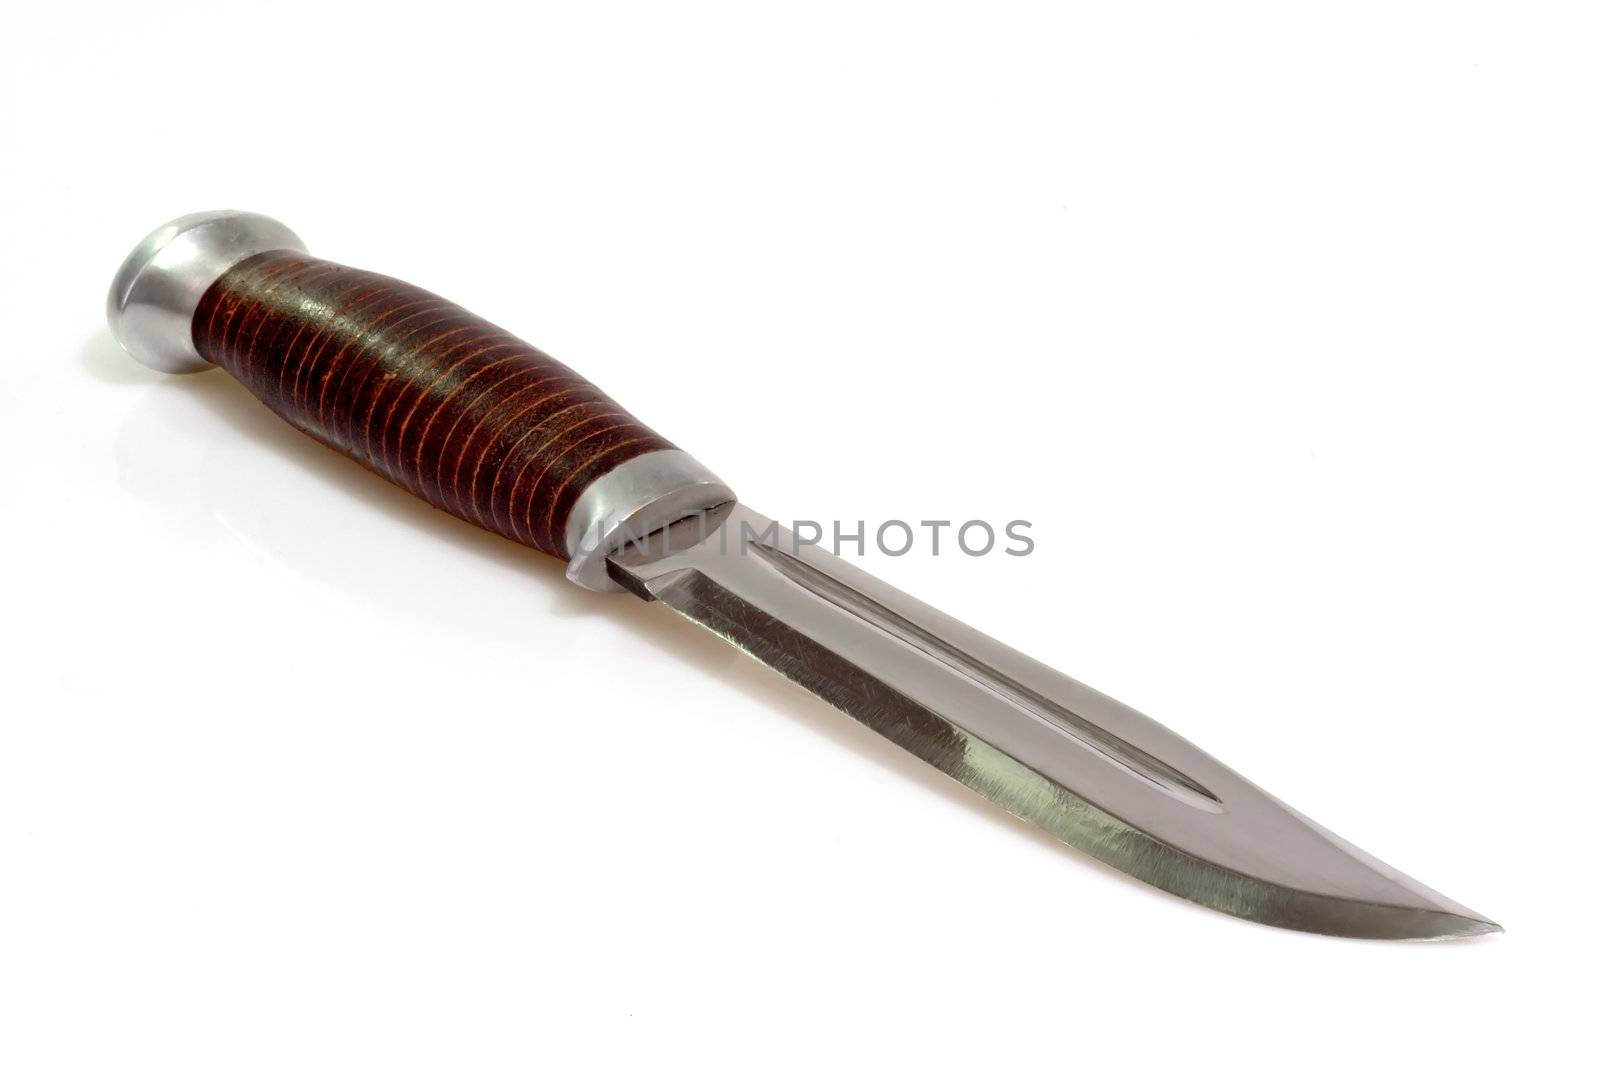 Closeup of a hunting knife on bright background.
